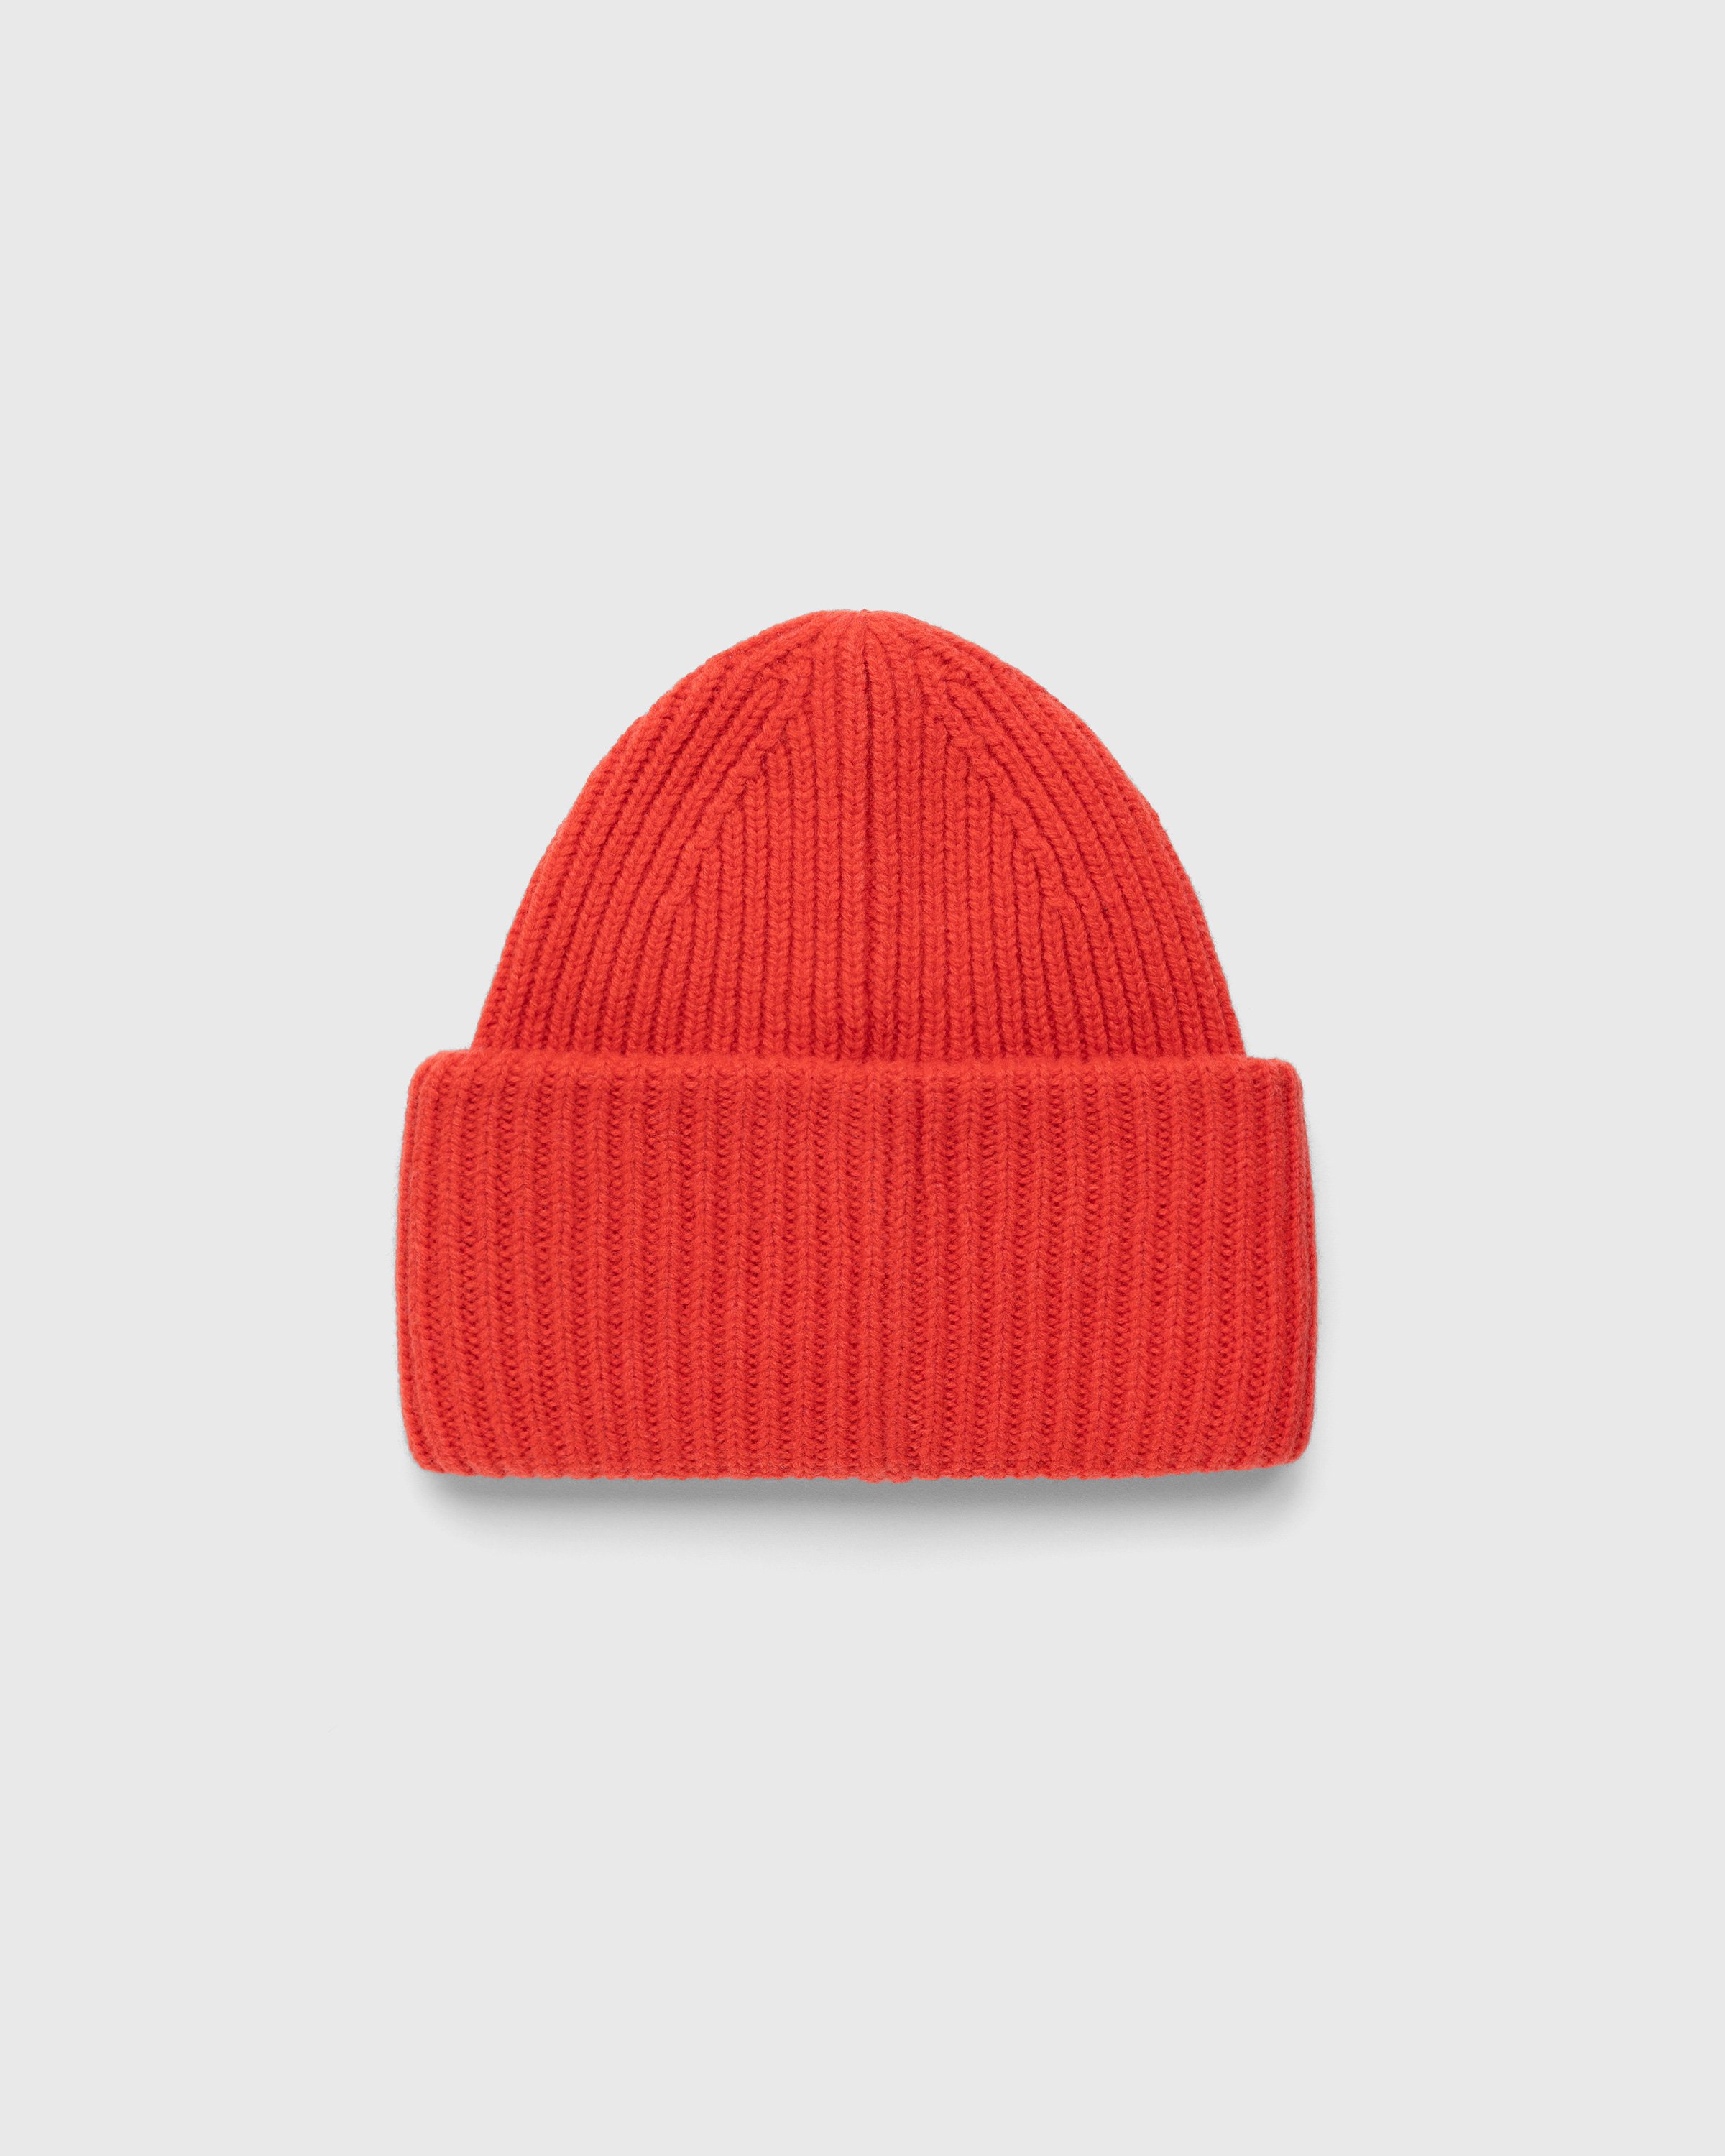 Acne Studios - Large Face Logo Beanie Red - Accessories - Red - Image 2